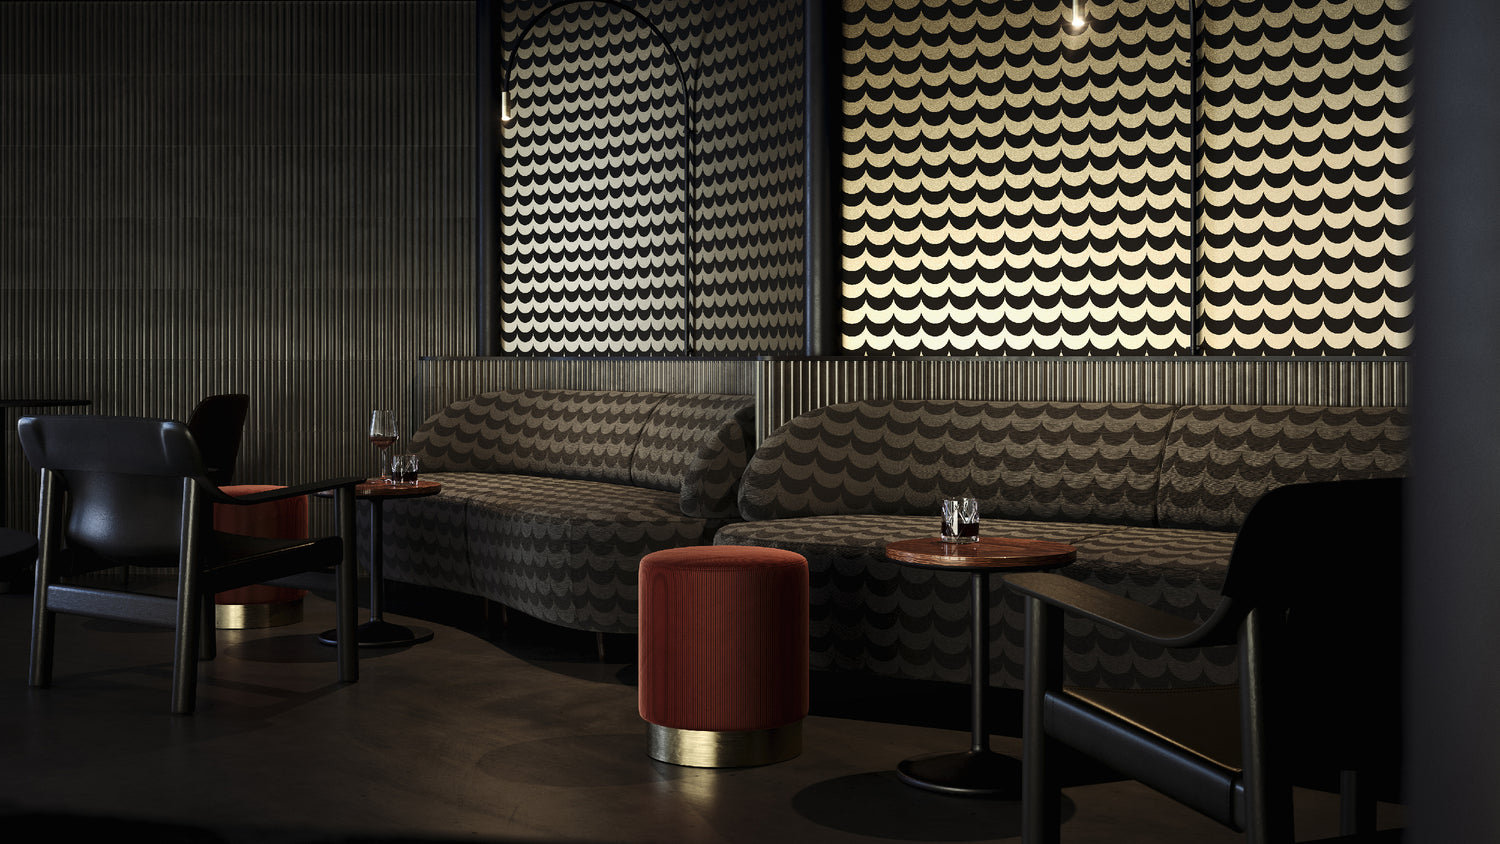 Black and gold bar room, with Scoop wallpaper and upholstery fabric